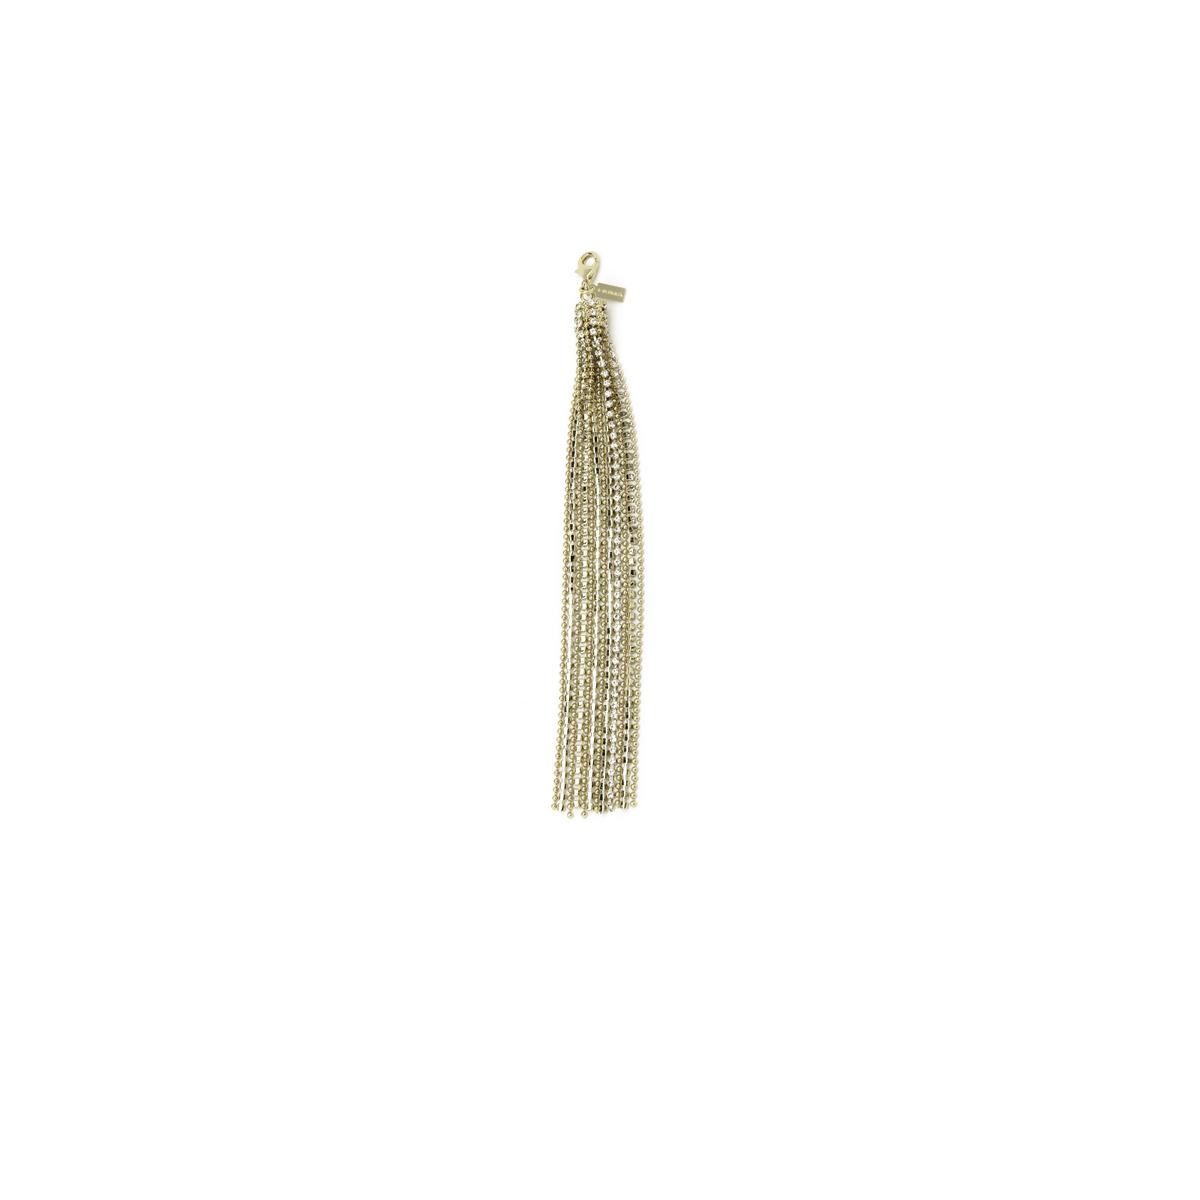 Huma CRYSTAL FRINGES EARRING E18 Gold & Crystals E18 Gold & Crystals - anteprima prodotto 3/3